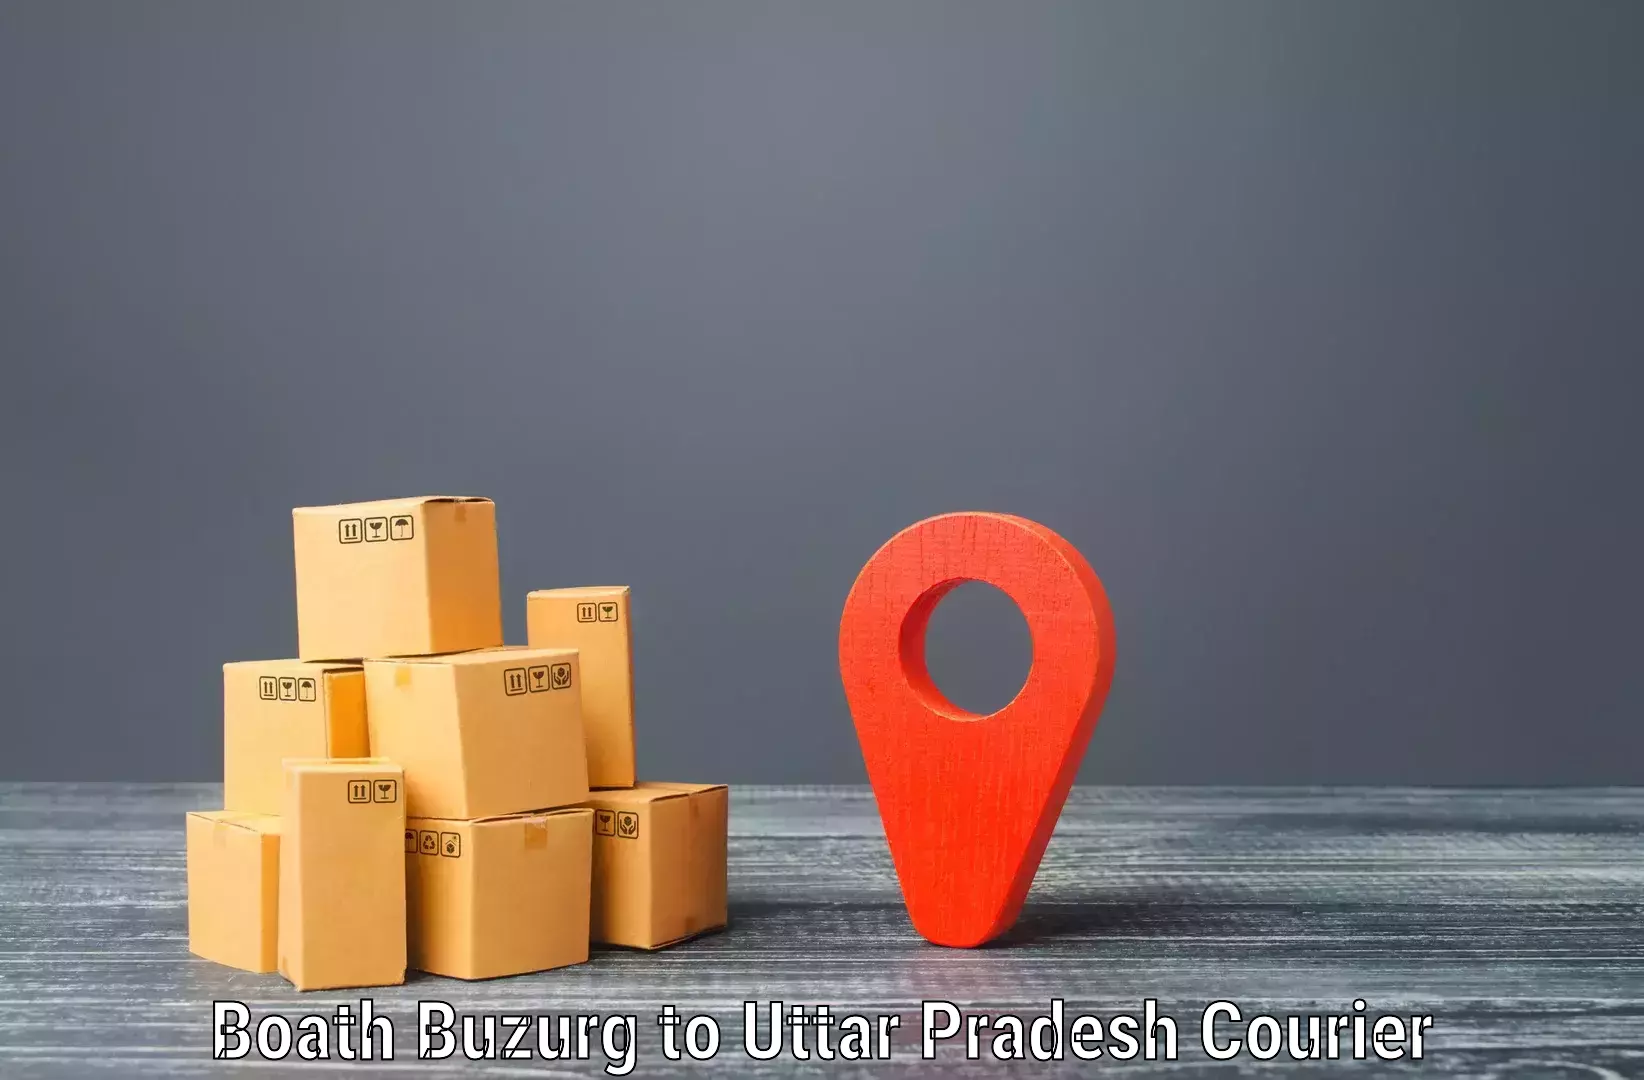 On-time delivery services Boath Buzurg to Kalpi